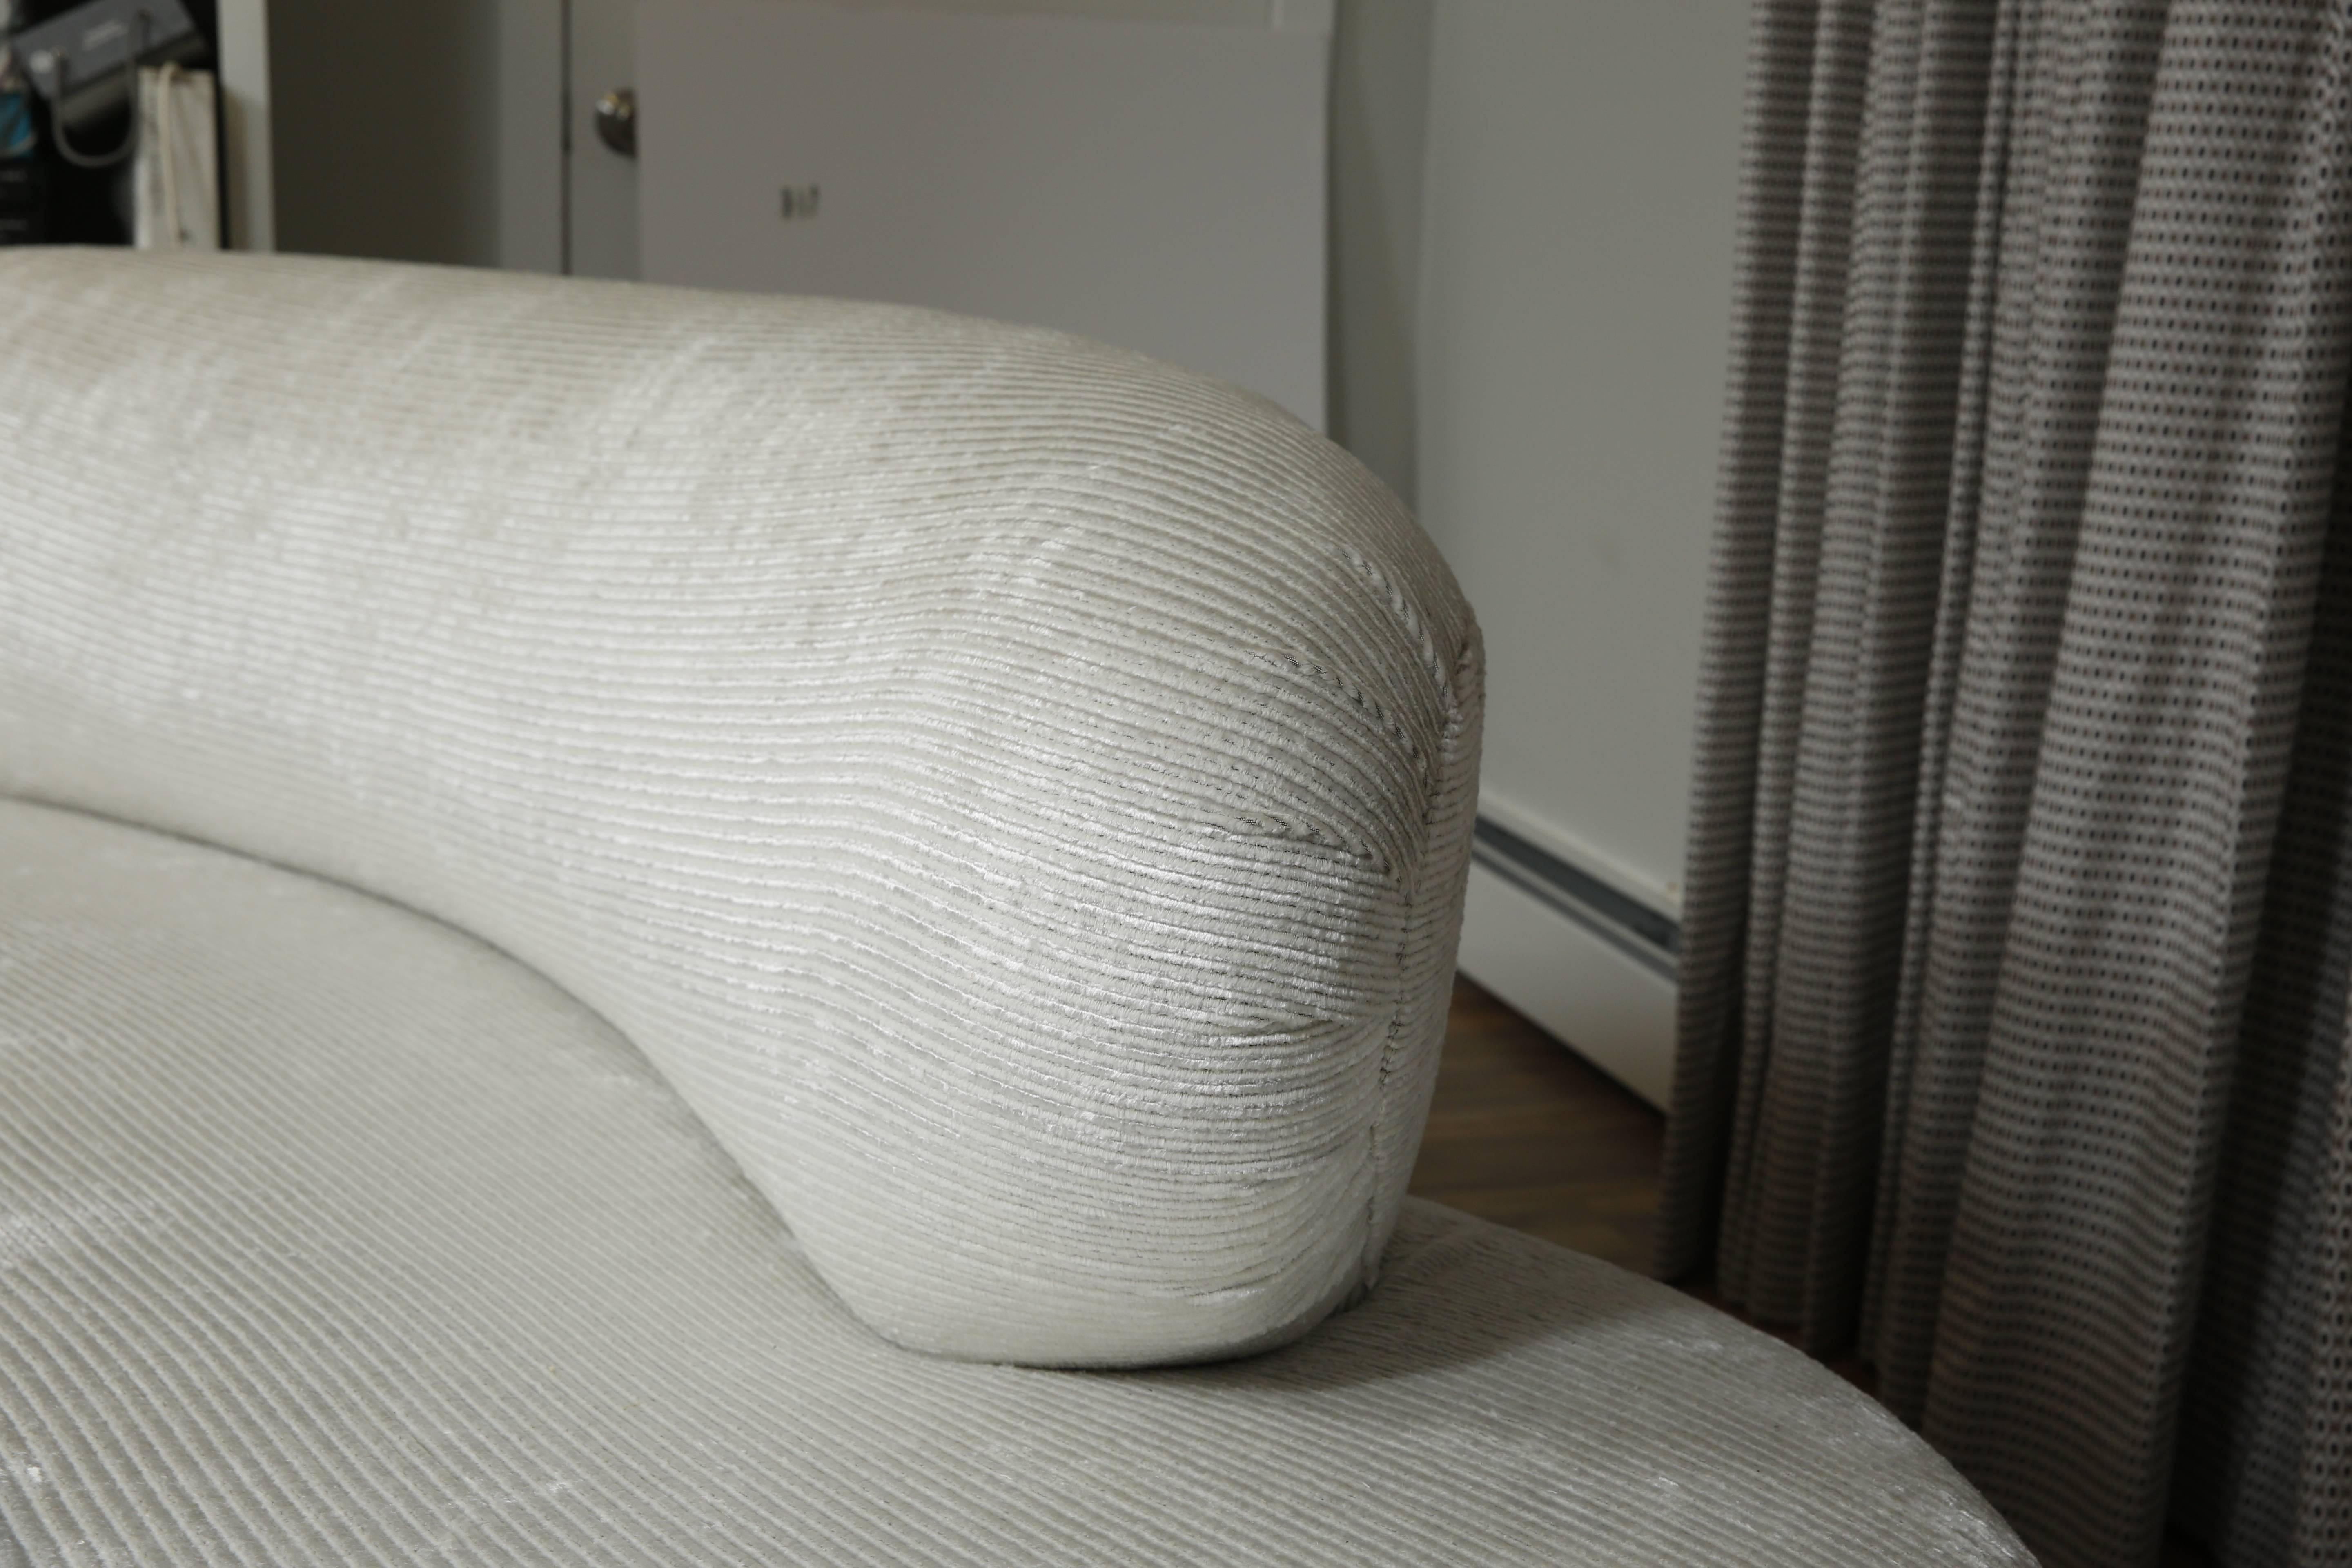 Iconic biomorphic sofa. Reupholstered in off white linen and resting on brushed aluminum trimmed pedestals.